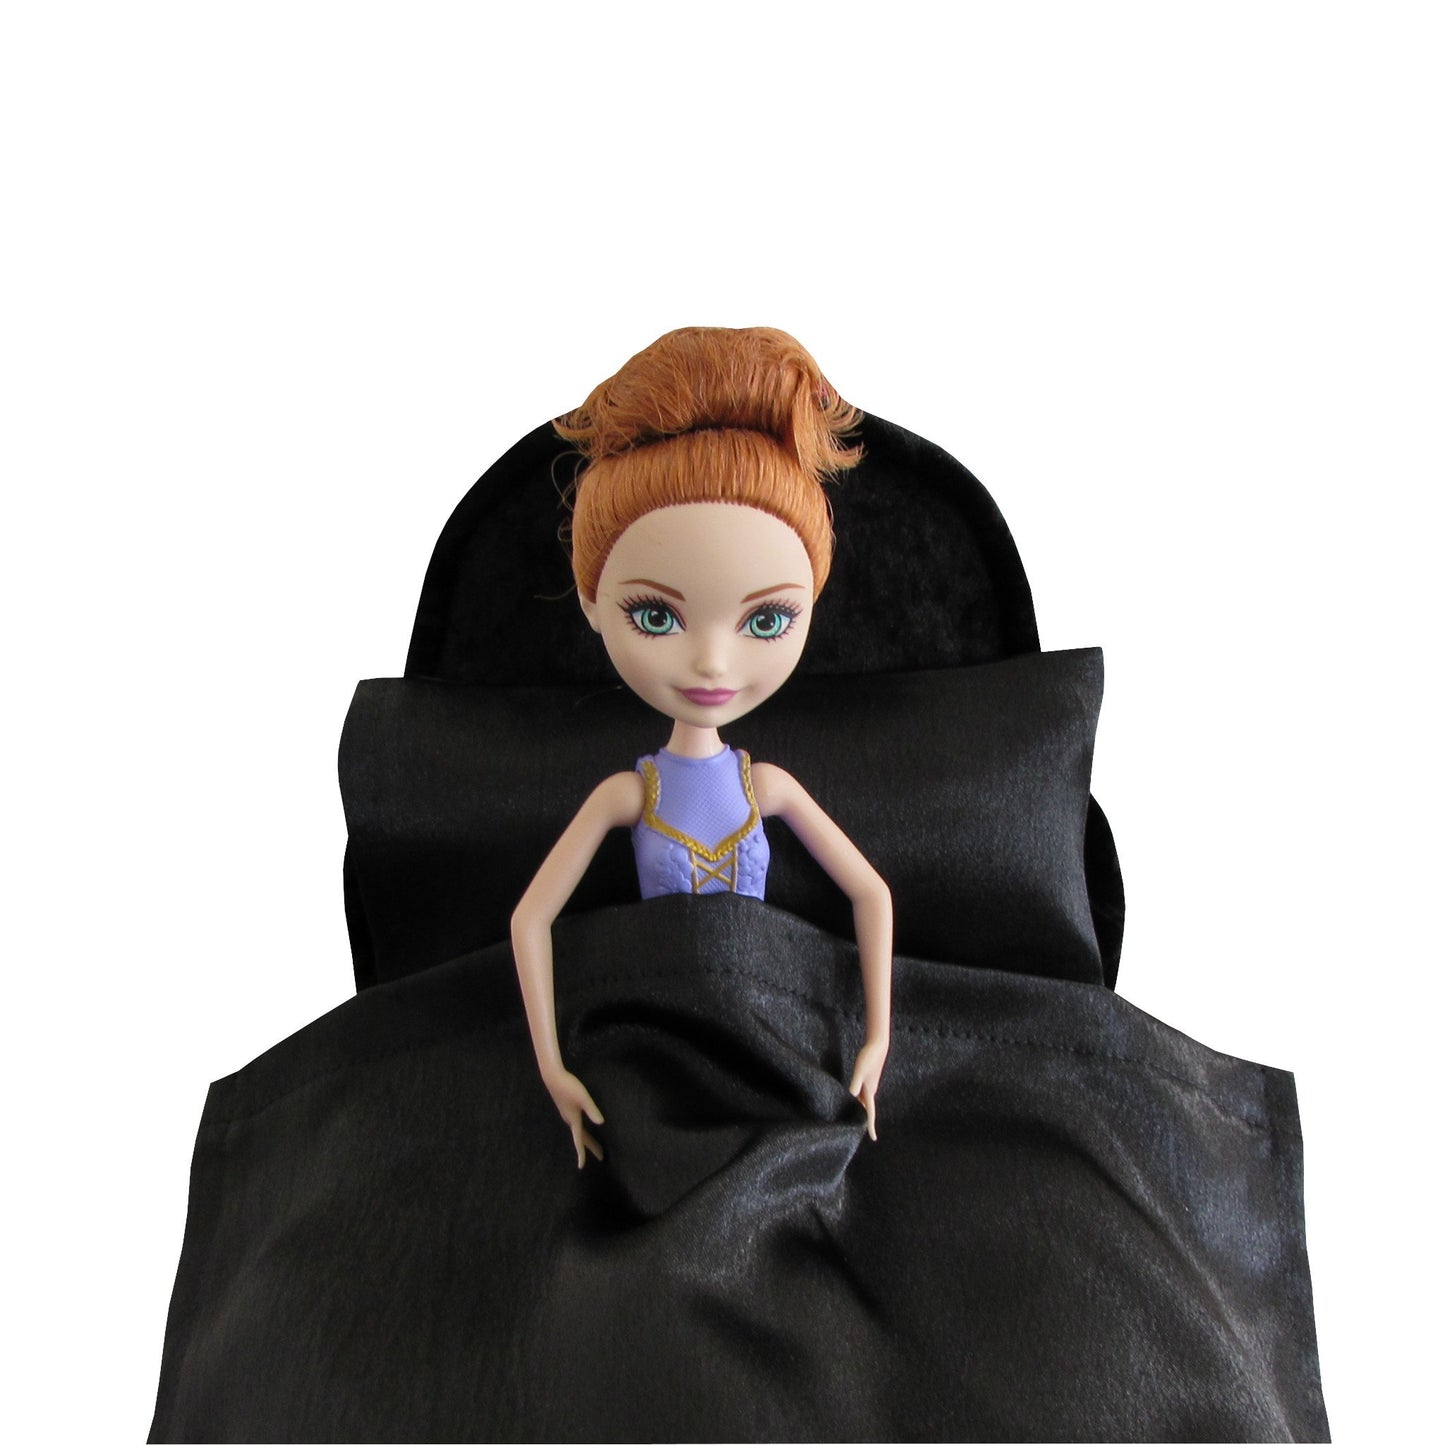 Black Satin Doll Fitted Sheet, Pillow, and Black Crushed Velvet Doll Bed for 11.5-inch and 12-inch dolls with ballerina doll